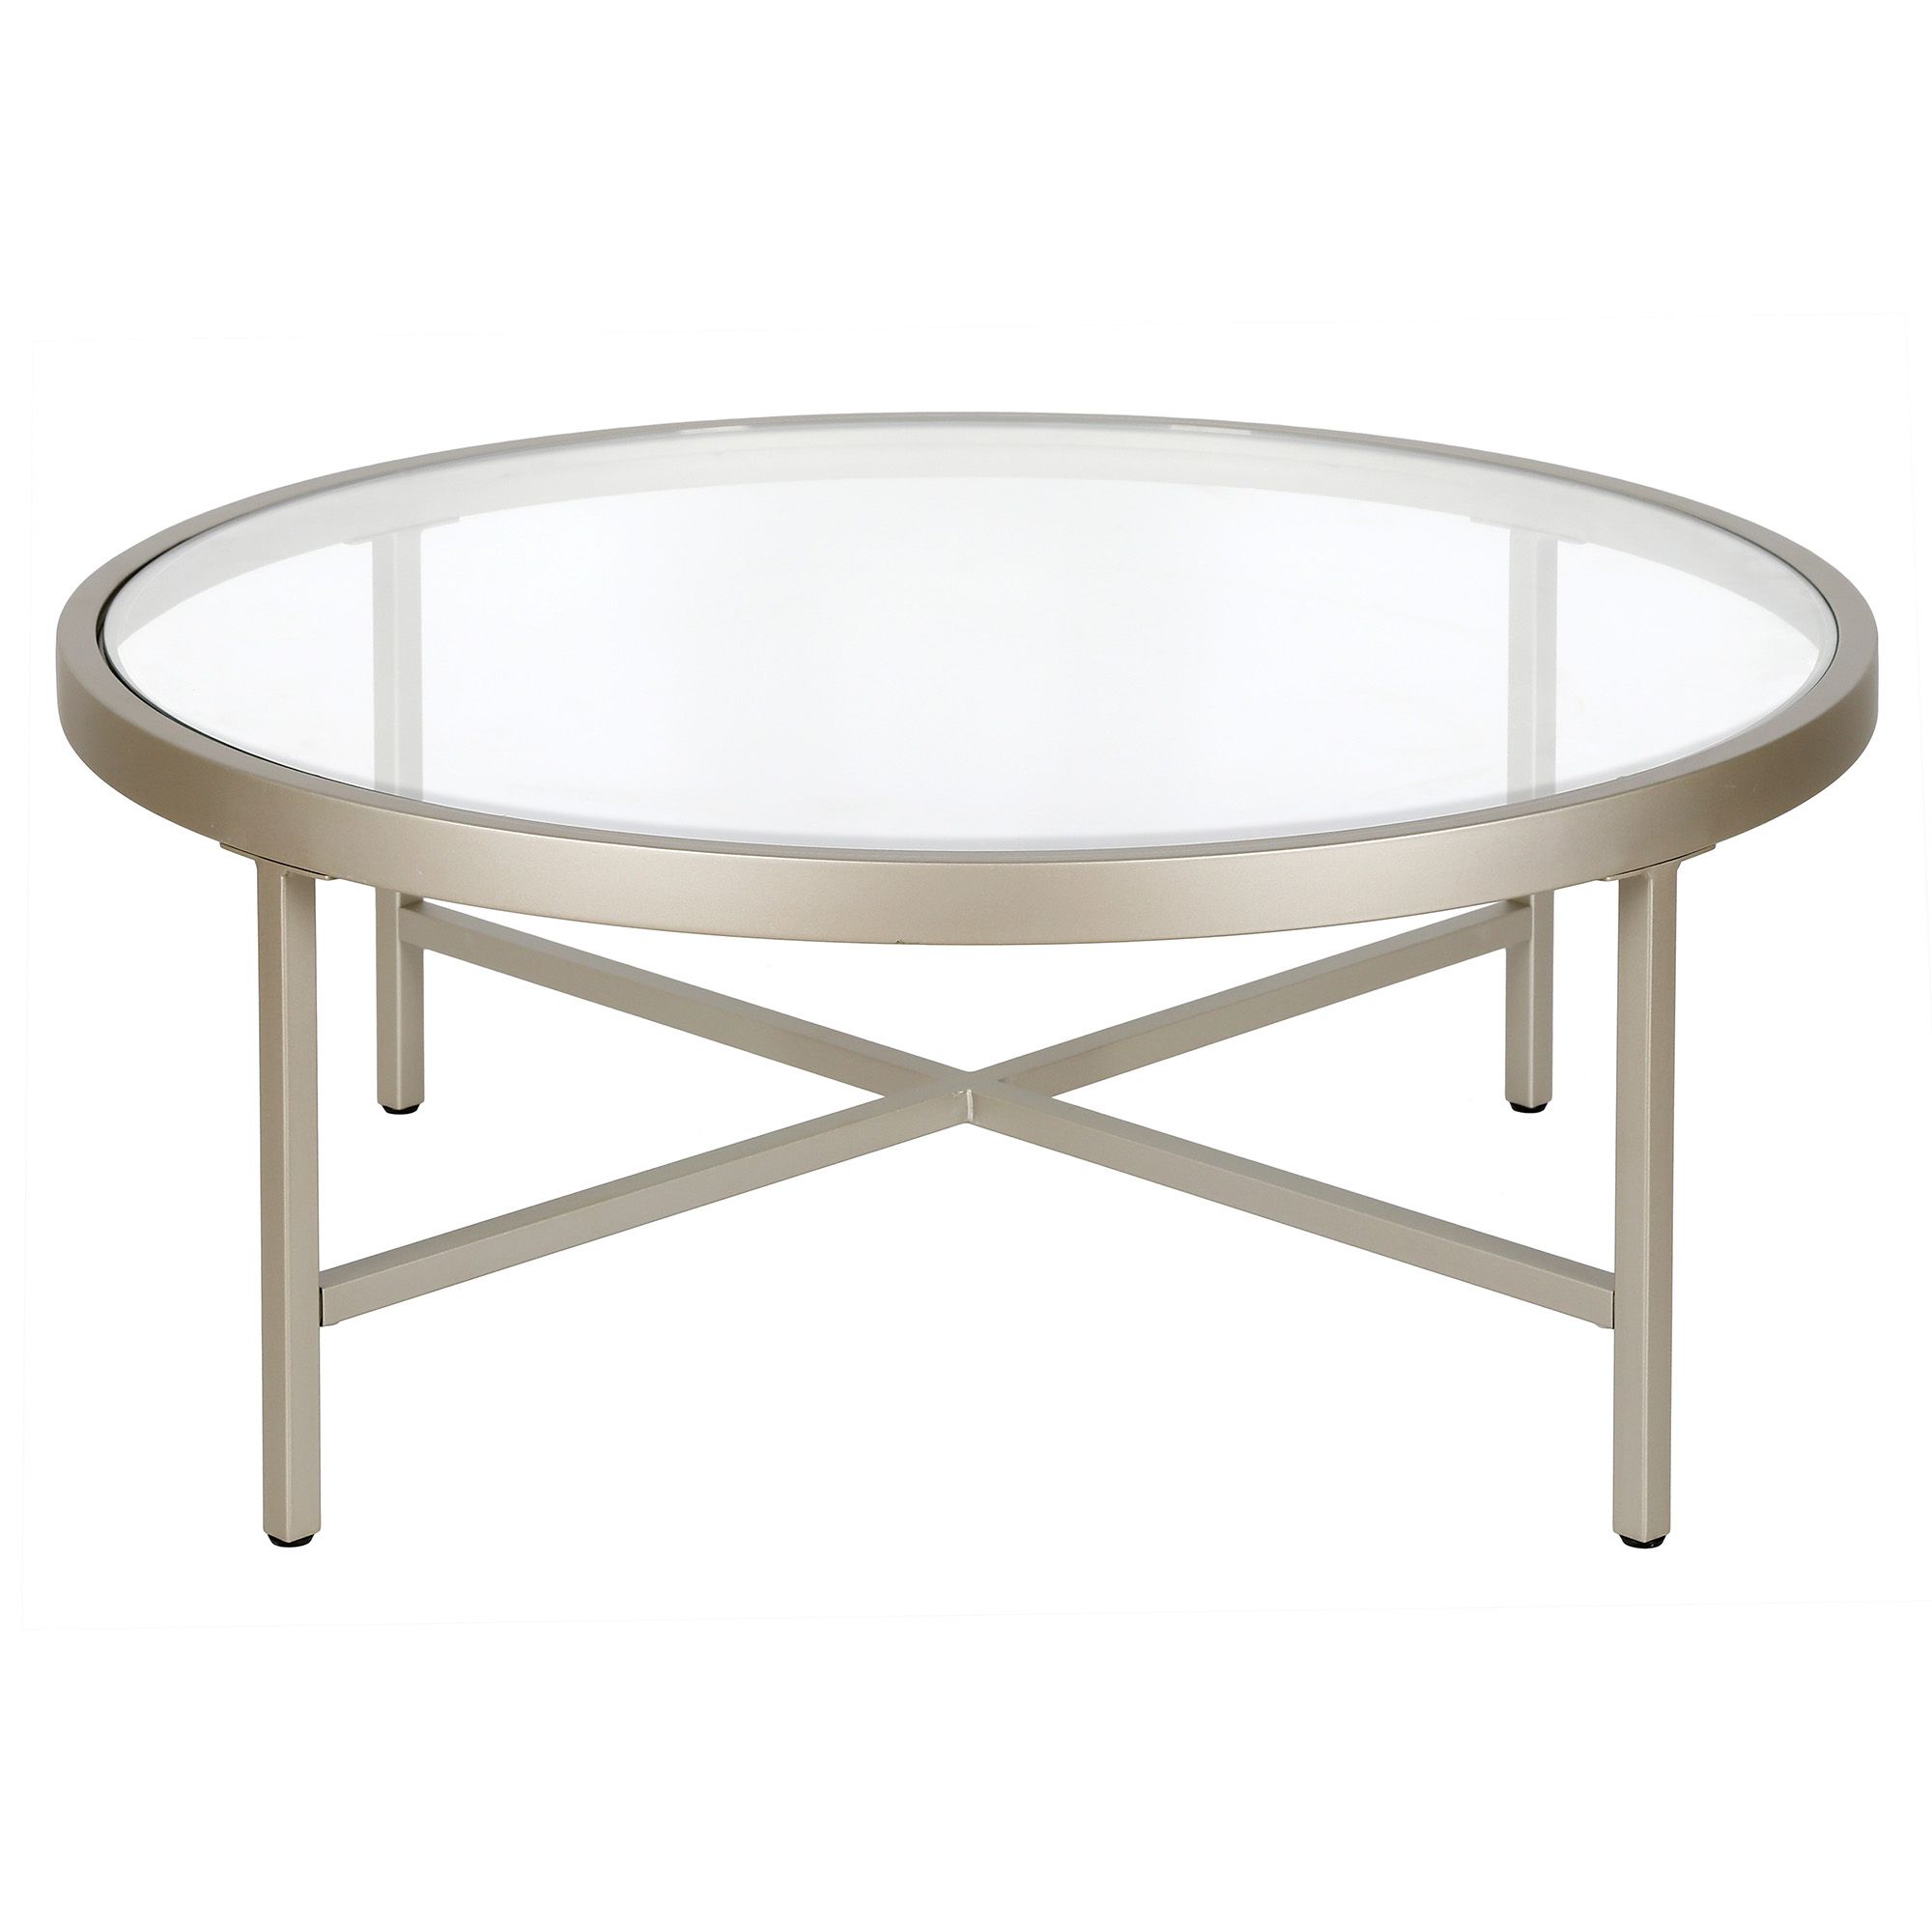 Most Current Geometric Glass Modern Coffee Tables Regarding Evelyn&zoe Contemporary Round Coffee Table With Glass Top (View 11 of 20)